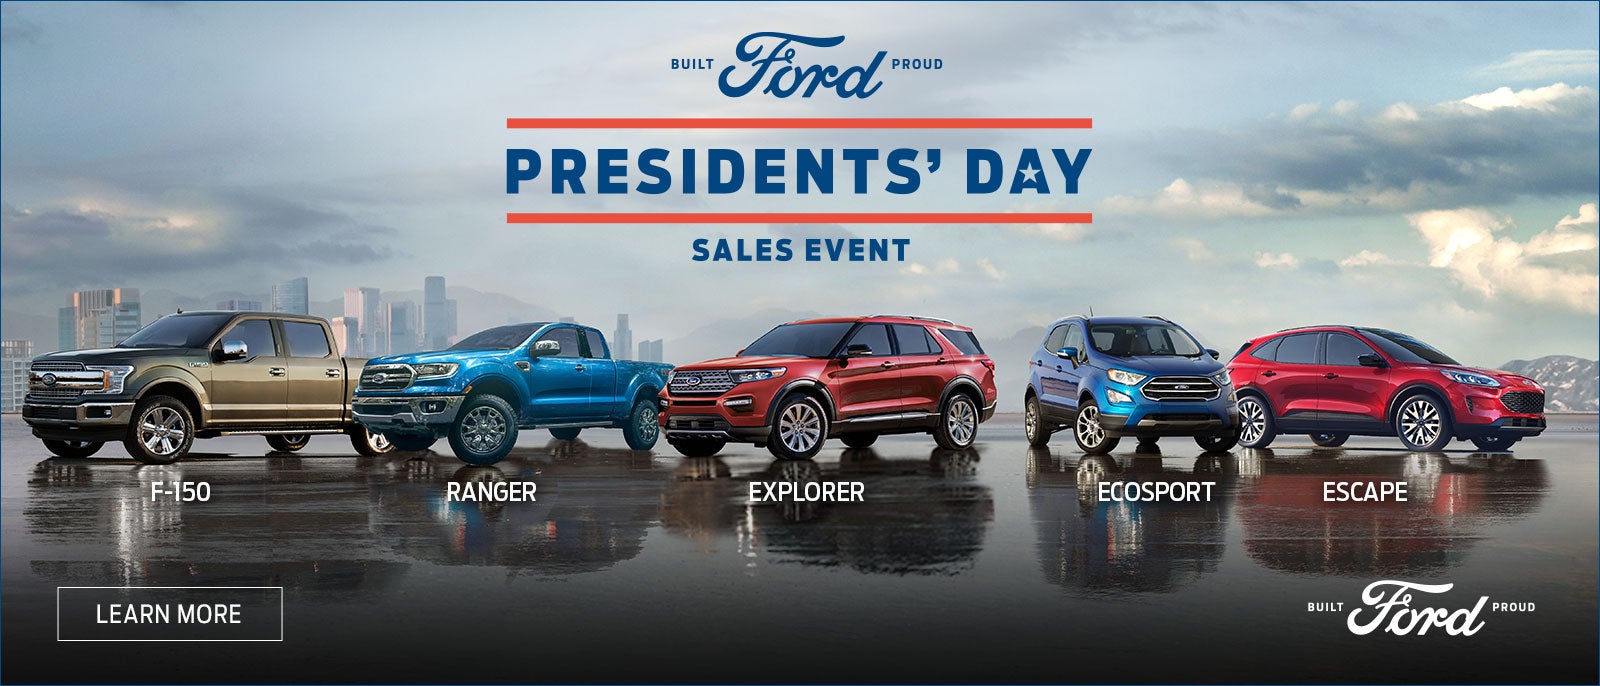 Ford president's day event